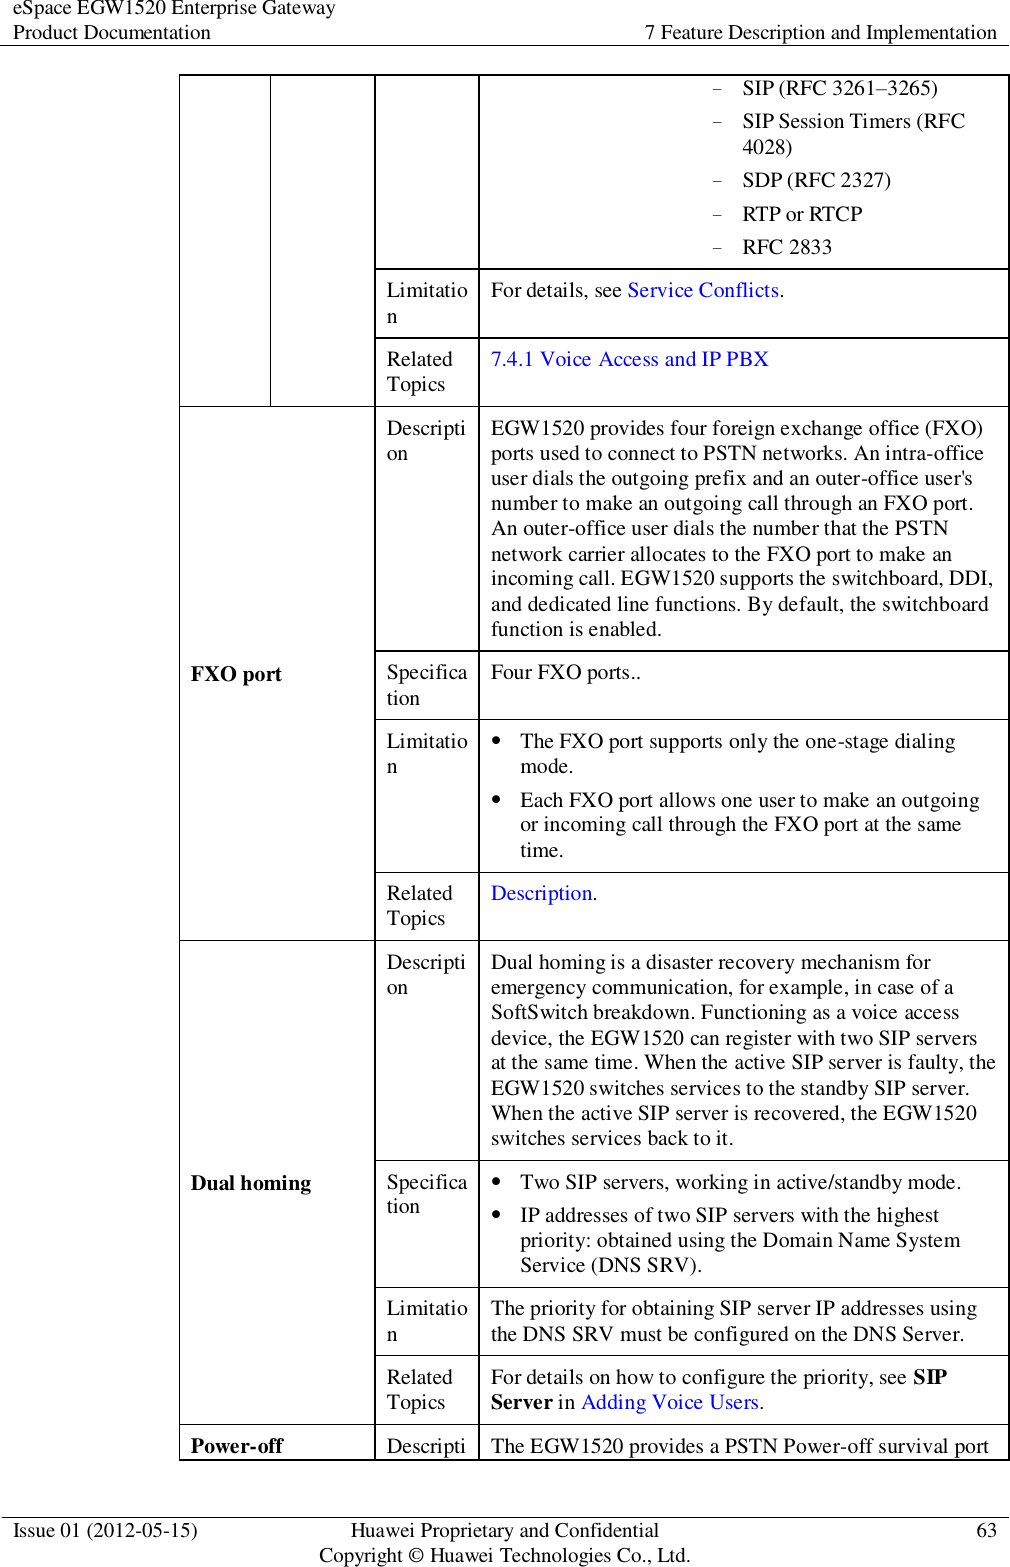 eSpace EGW1520 Enterprise Gateway Product Documentation 7 Feature Description and Implementation  Issue 01 (2012-05-15) Huawei Proprietary and Confidential                                     Copyright © Huawei Technologies Co., Ltd. 63  − SIP (RFC 3261–3265) − SIP Session Timers (RFC 4028) − SDP (RFC 2327) − RTP or RTCP − RFC 2833 Limitation For details, see Service Conflicts. Related Topics 7.4.1 Voice Access and IP PBX FXO port Description EGW1520 provides four foreign exchange office (FXO) ports used to connect to PSTN networks. An intra-office user dials the outgoing prefix and an outer-office user&apos;s number to make an outgoing call through an FXO port. An outer-office user dials the number that the PSTN network carrier allocates to the FXO port to make an incoming call. EGW1520 supports the switchboard, DDI, and dedicated line functions. By default, the switchboard function is enabled. Specification Four FXO ports.. Limitation  The FXO port supports only the one-stage dialing mode.  Each FXO port allows one user to make an outgoing or incoming call through the FXO port at the same time. Related Topics Description. Dual homing Description Dual homing is a disaster recovery mechanism for emergency communication, for example, in case of a SoftSwitch breakdown. Functioning as a voice access device, the EGW1520 can register with two SIP servers at the same time. When the active SIP server is faulty, the EGW1520 switches services to the standby SIP server. When the active SIP server is recovered, the EGW1520 switches services back to it. Specification  Two SIP servers, working in active/standby mode.  IP addresses of two SIP servers with the highest priority: obtained using the Domain Name System Service (DNS SRV). Limitation The priority for obtaining SIP server IP addresses using the DNS SRV must be configured on the DNS Server. Related Topics For details on how to configure the priority, see SIP Server in Adding Voice Users. Power-off DescriptiThe EGW1520 provides a PSTN Power-off survival port 